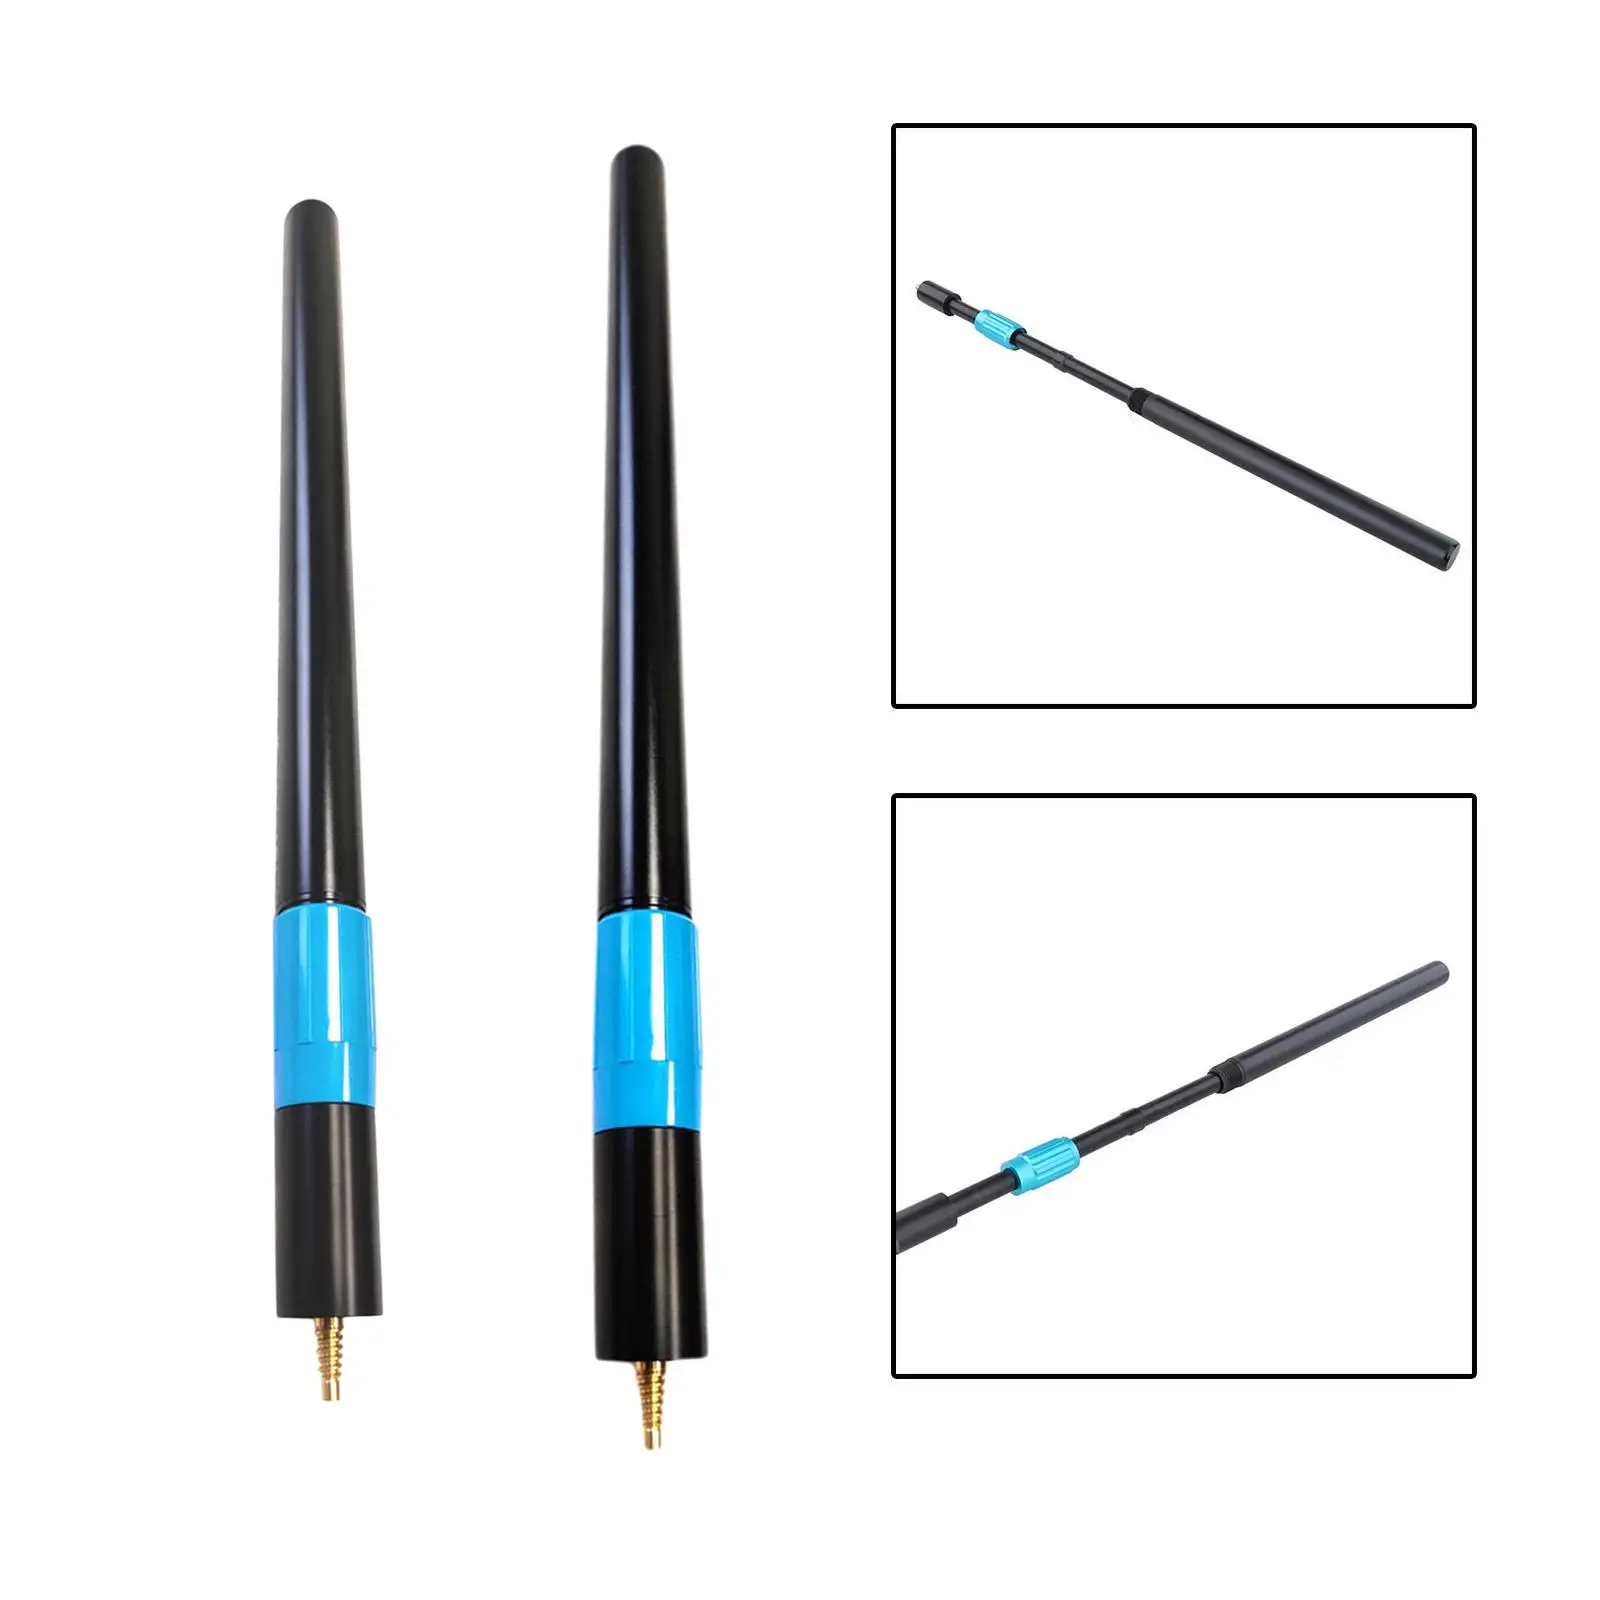 Snooker Pool Cue Extension, Professional High Strength Training Tool Lightweight Telescopic Billiard Cue Extension Accessory